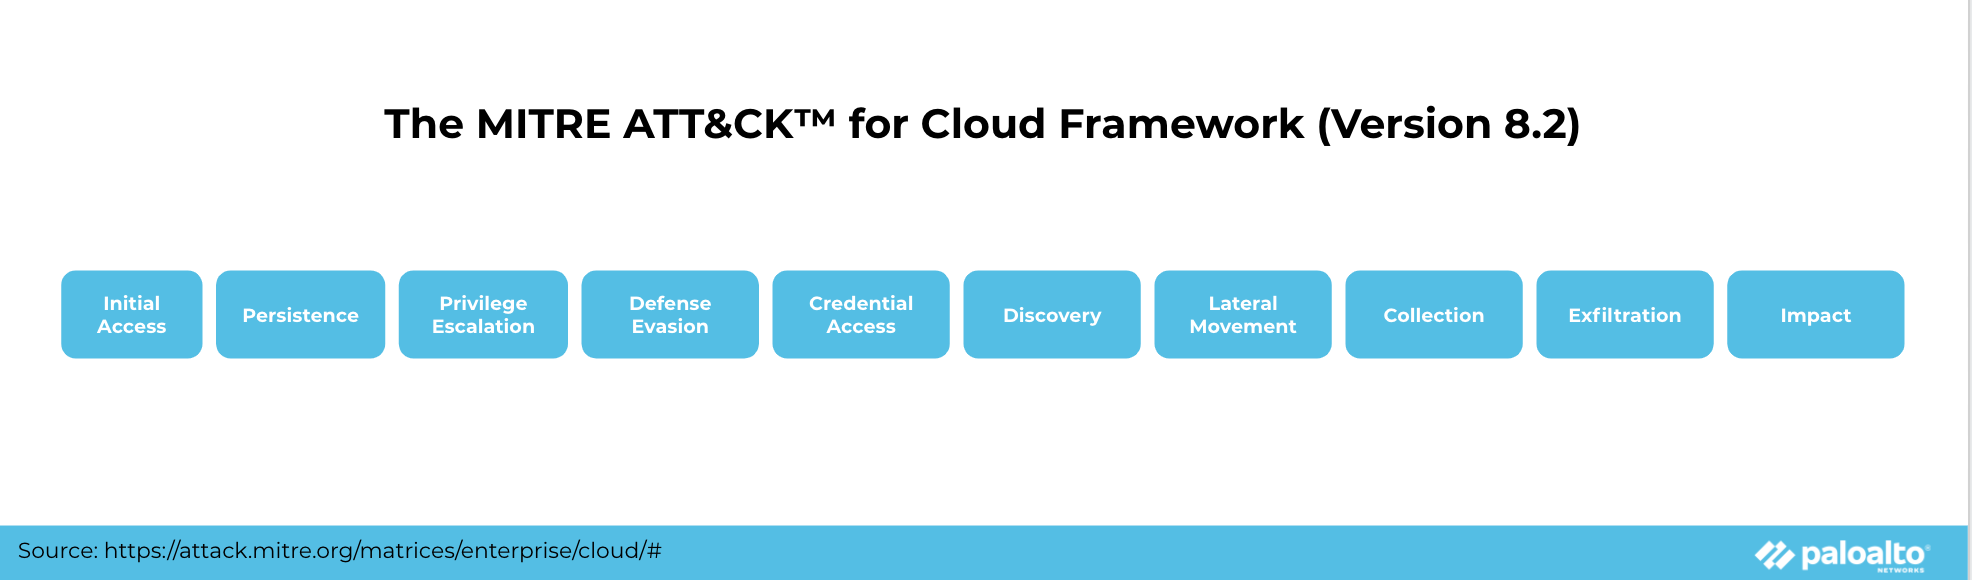 The list of tactics included in the ATT&CK for Cloud framework